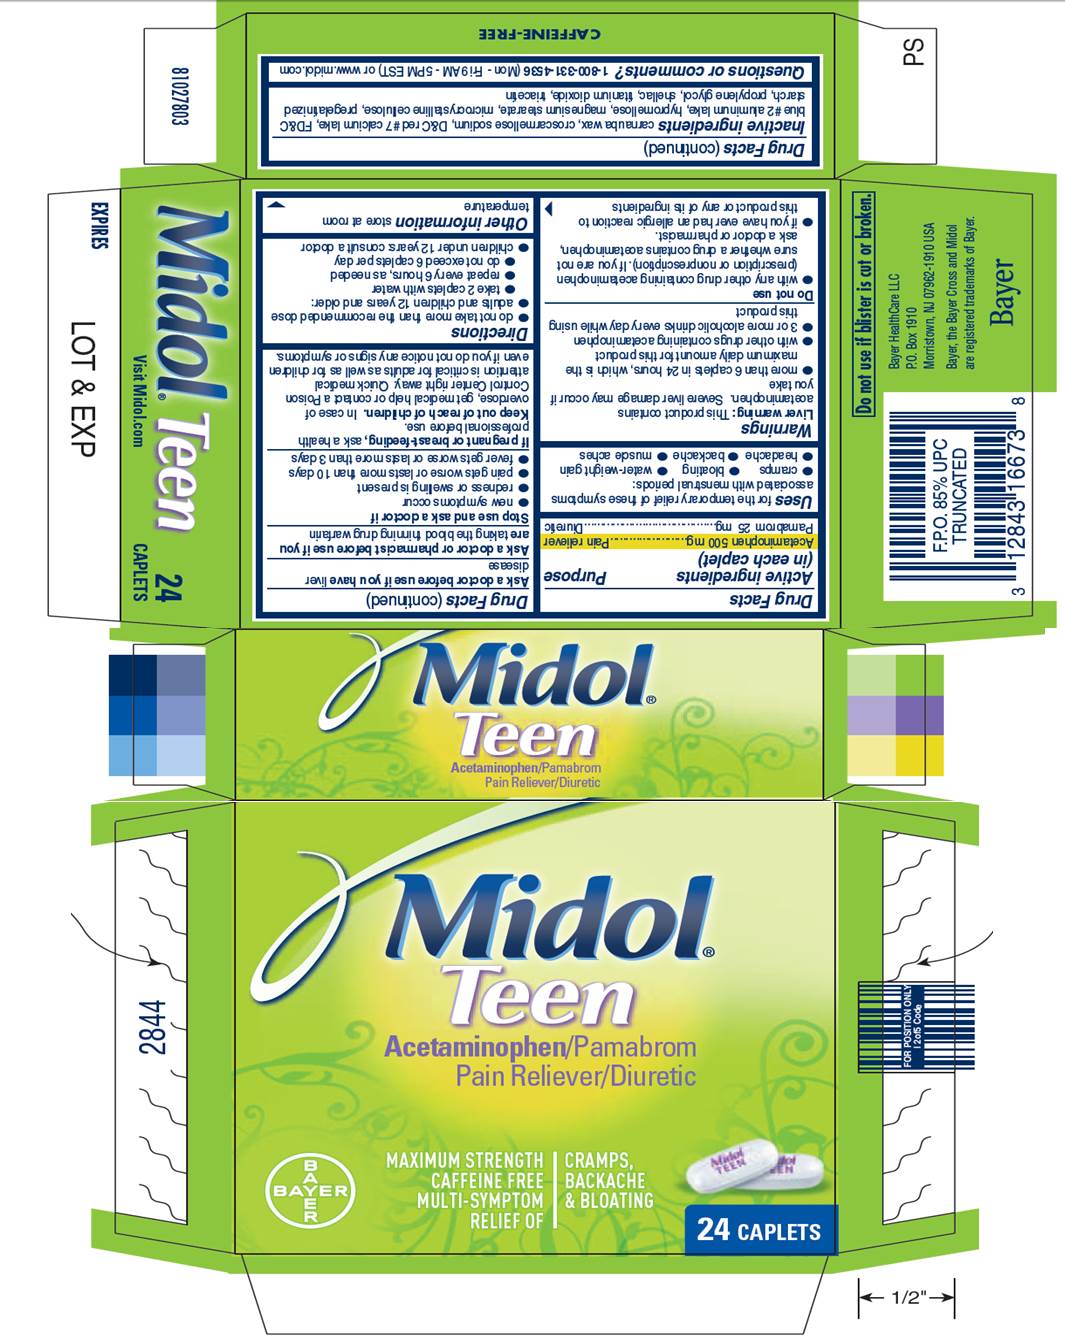 The Active Ingredients in Midol